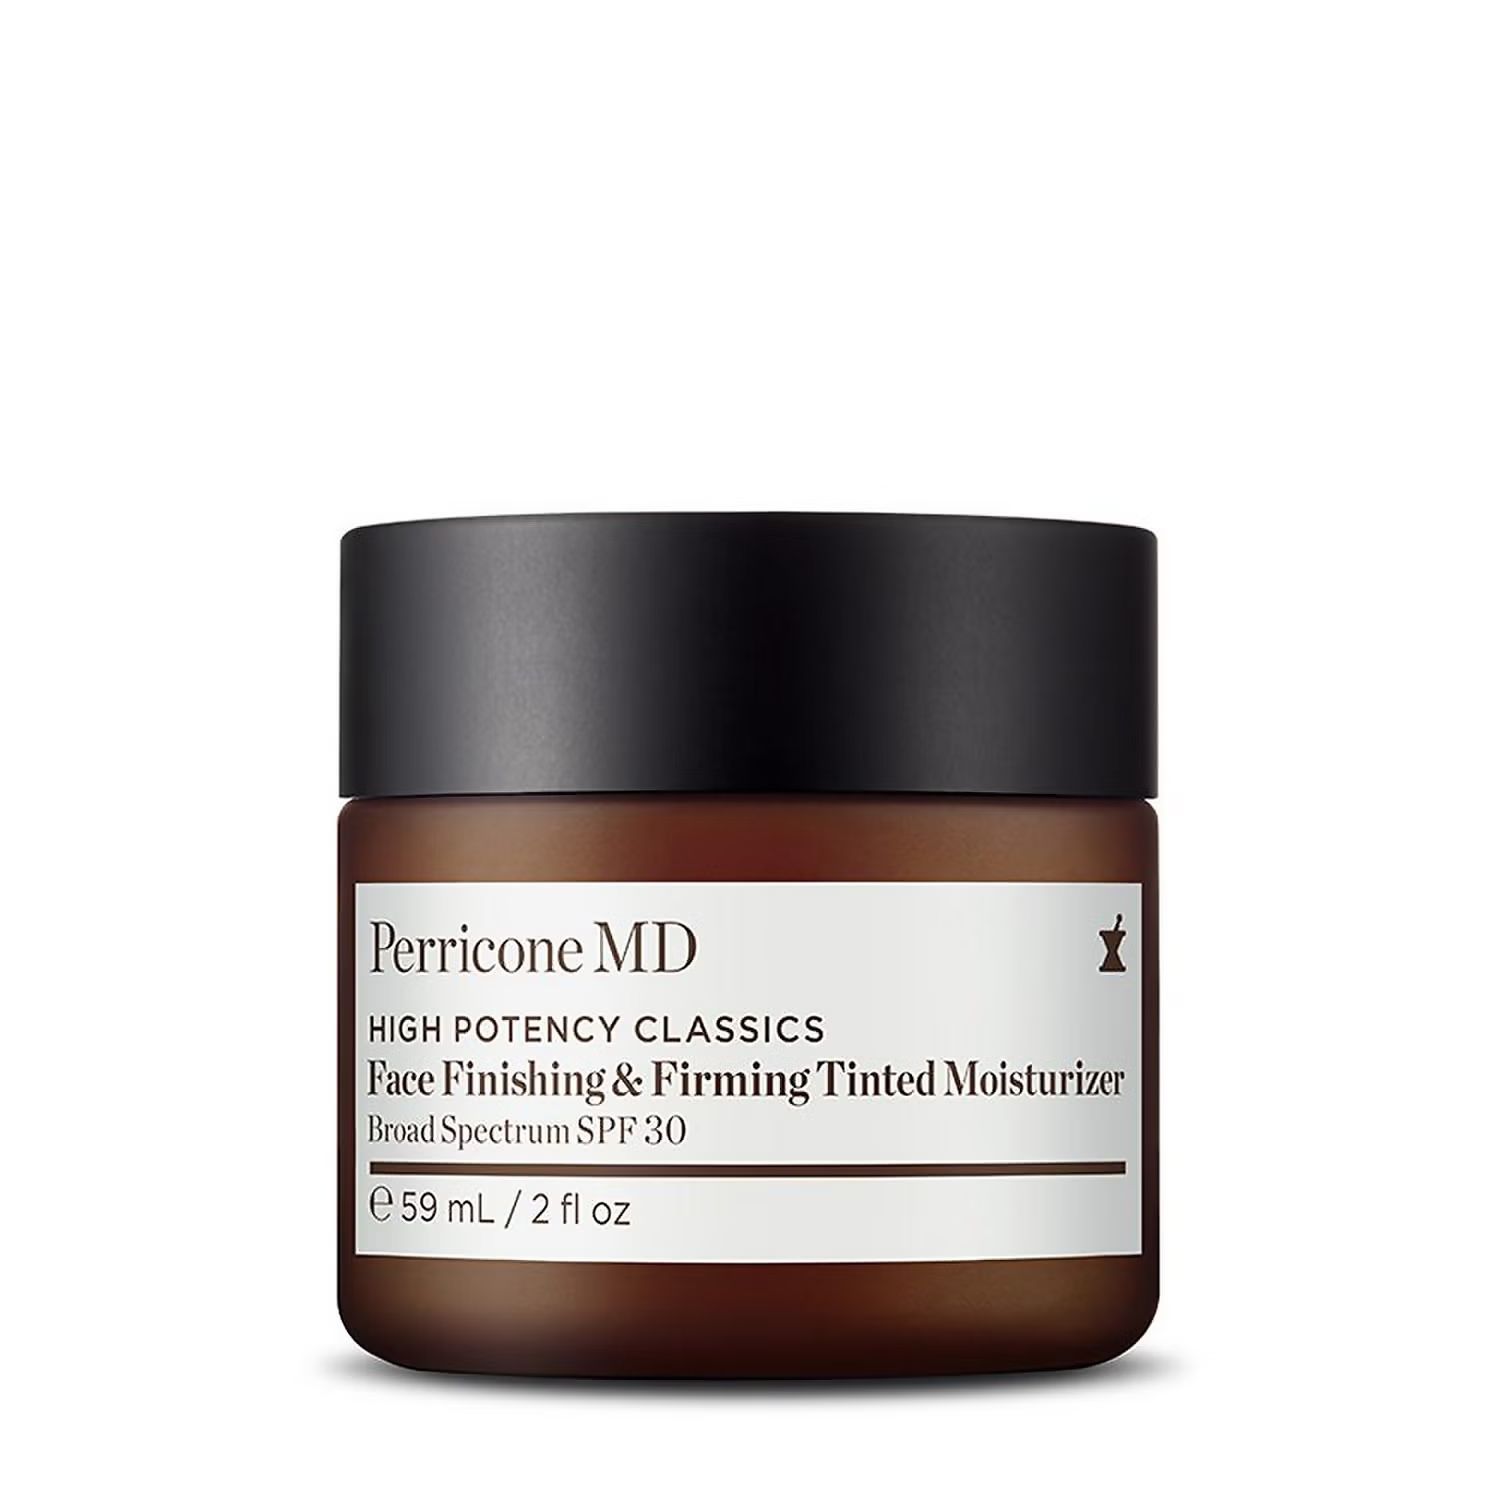 High Potency Classics Face Finishing & Firming Tinted Moisturizer Broad Spectrum SPF 30 | PerriconeMD US